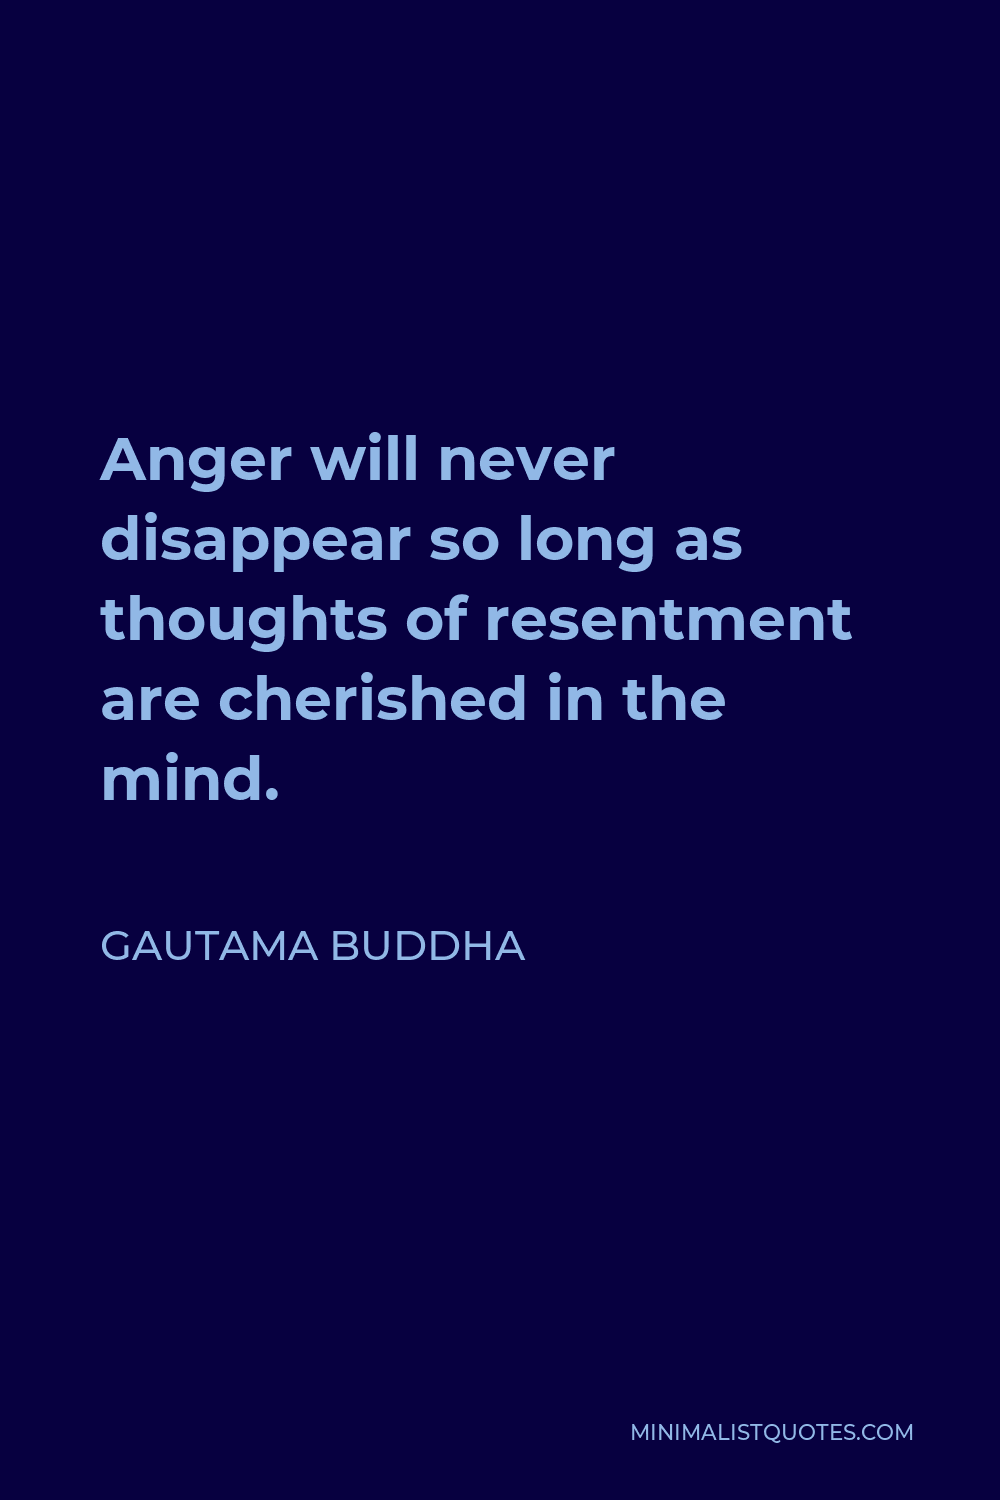 Gautama Buddha Quote - Anger will never disappear so long as thoughts of resentment are cherished in the mind.